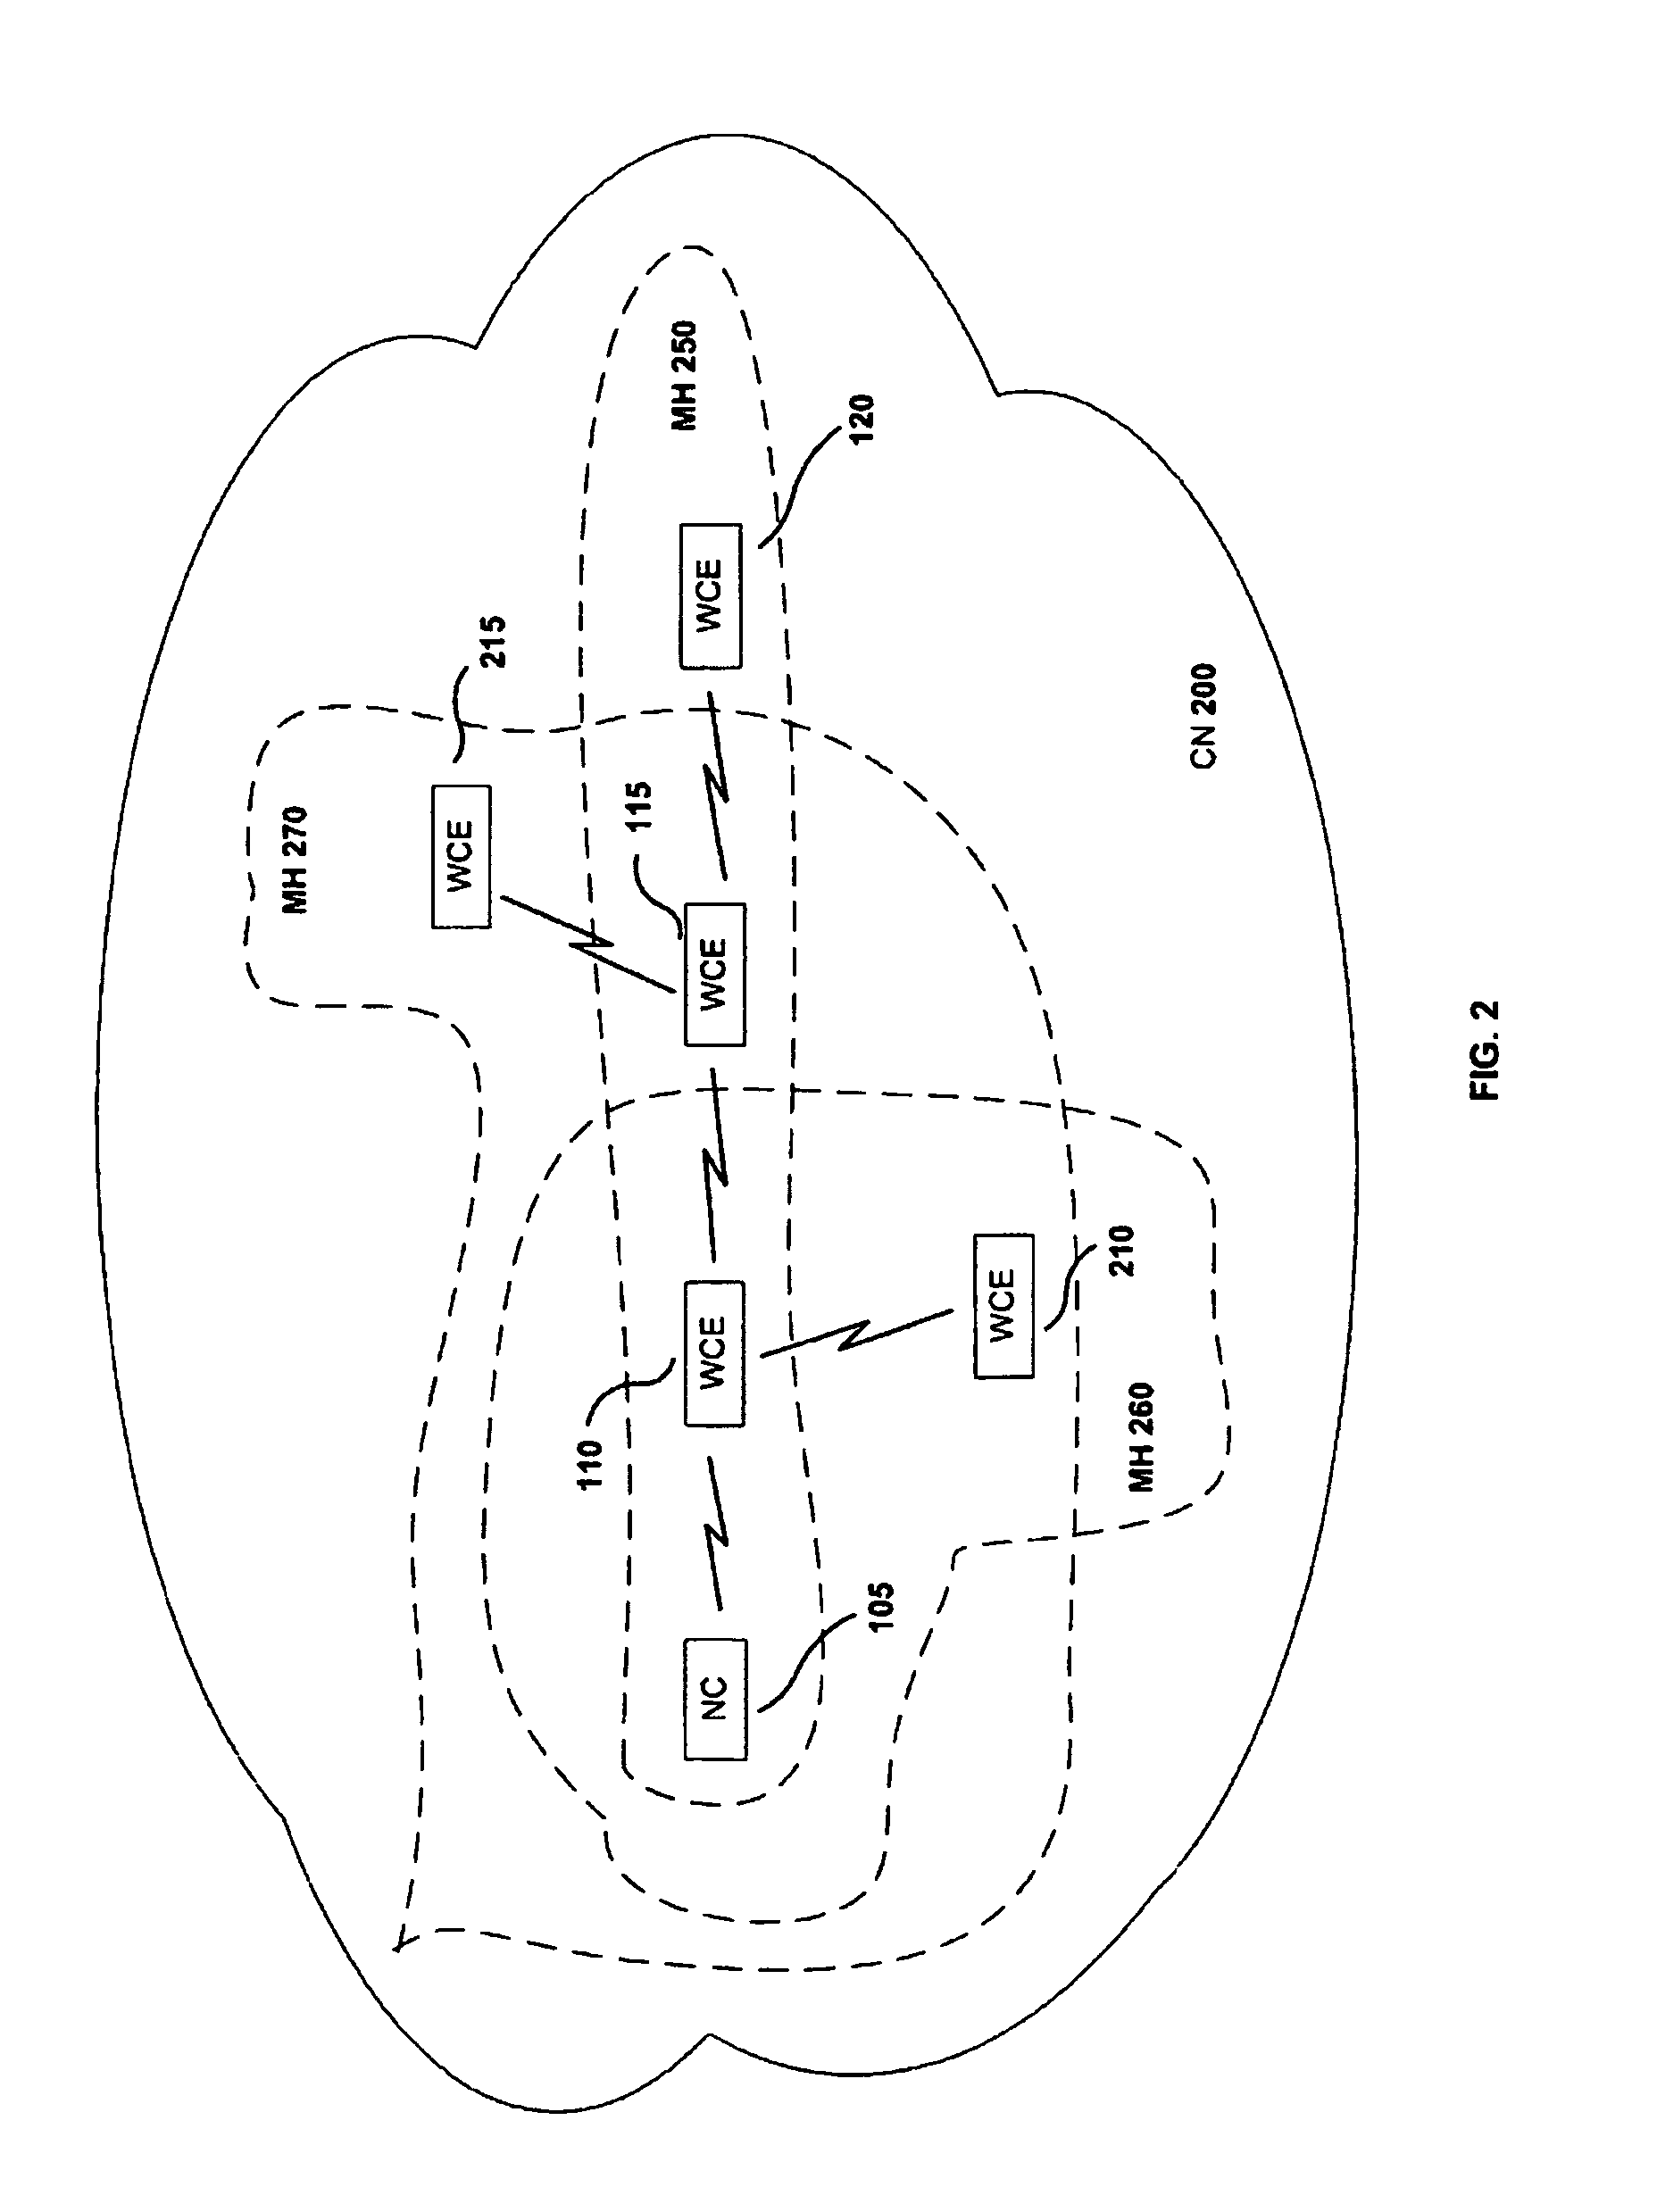 Method for selective distribution of communications infrastructure